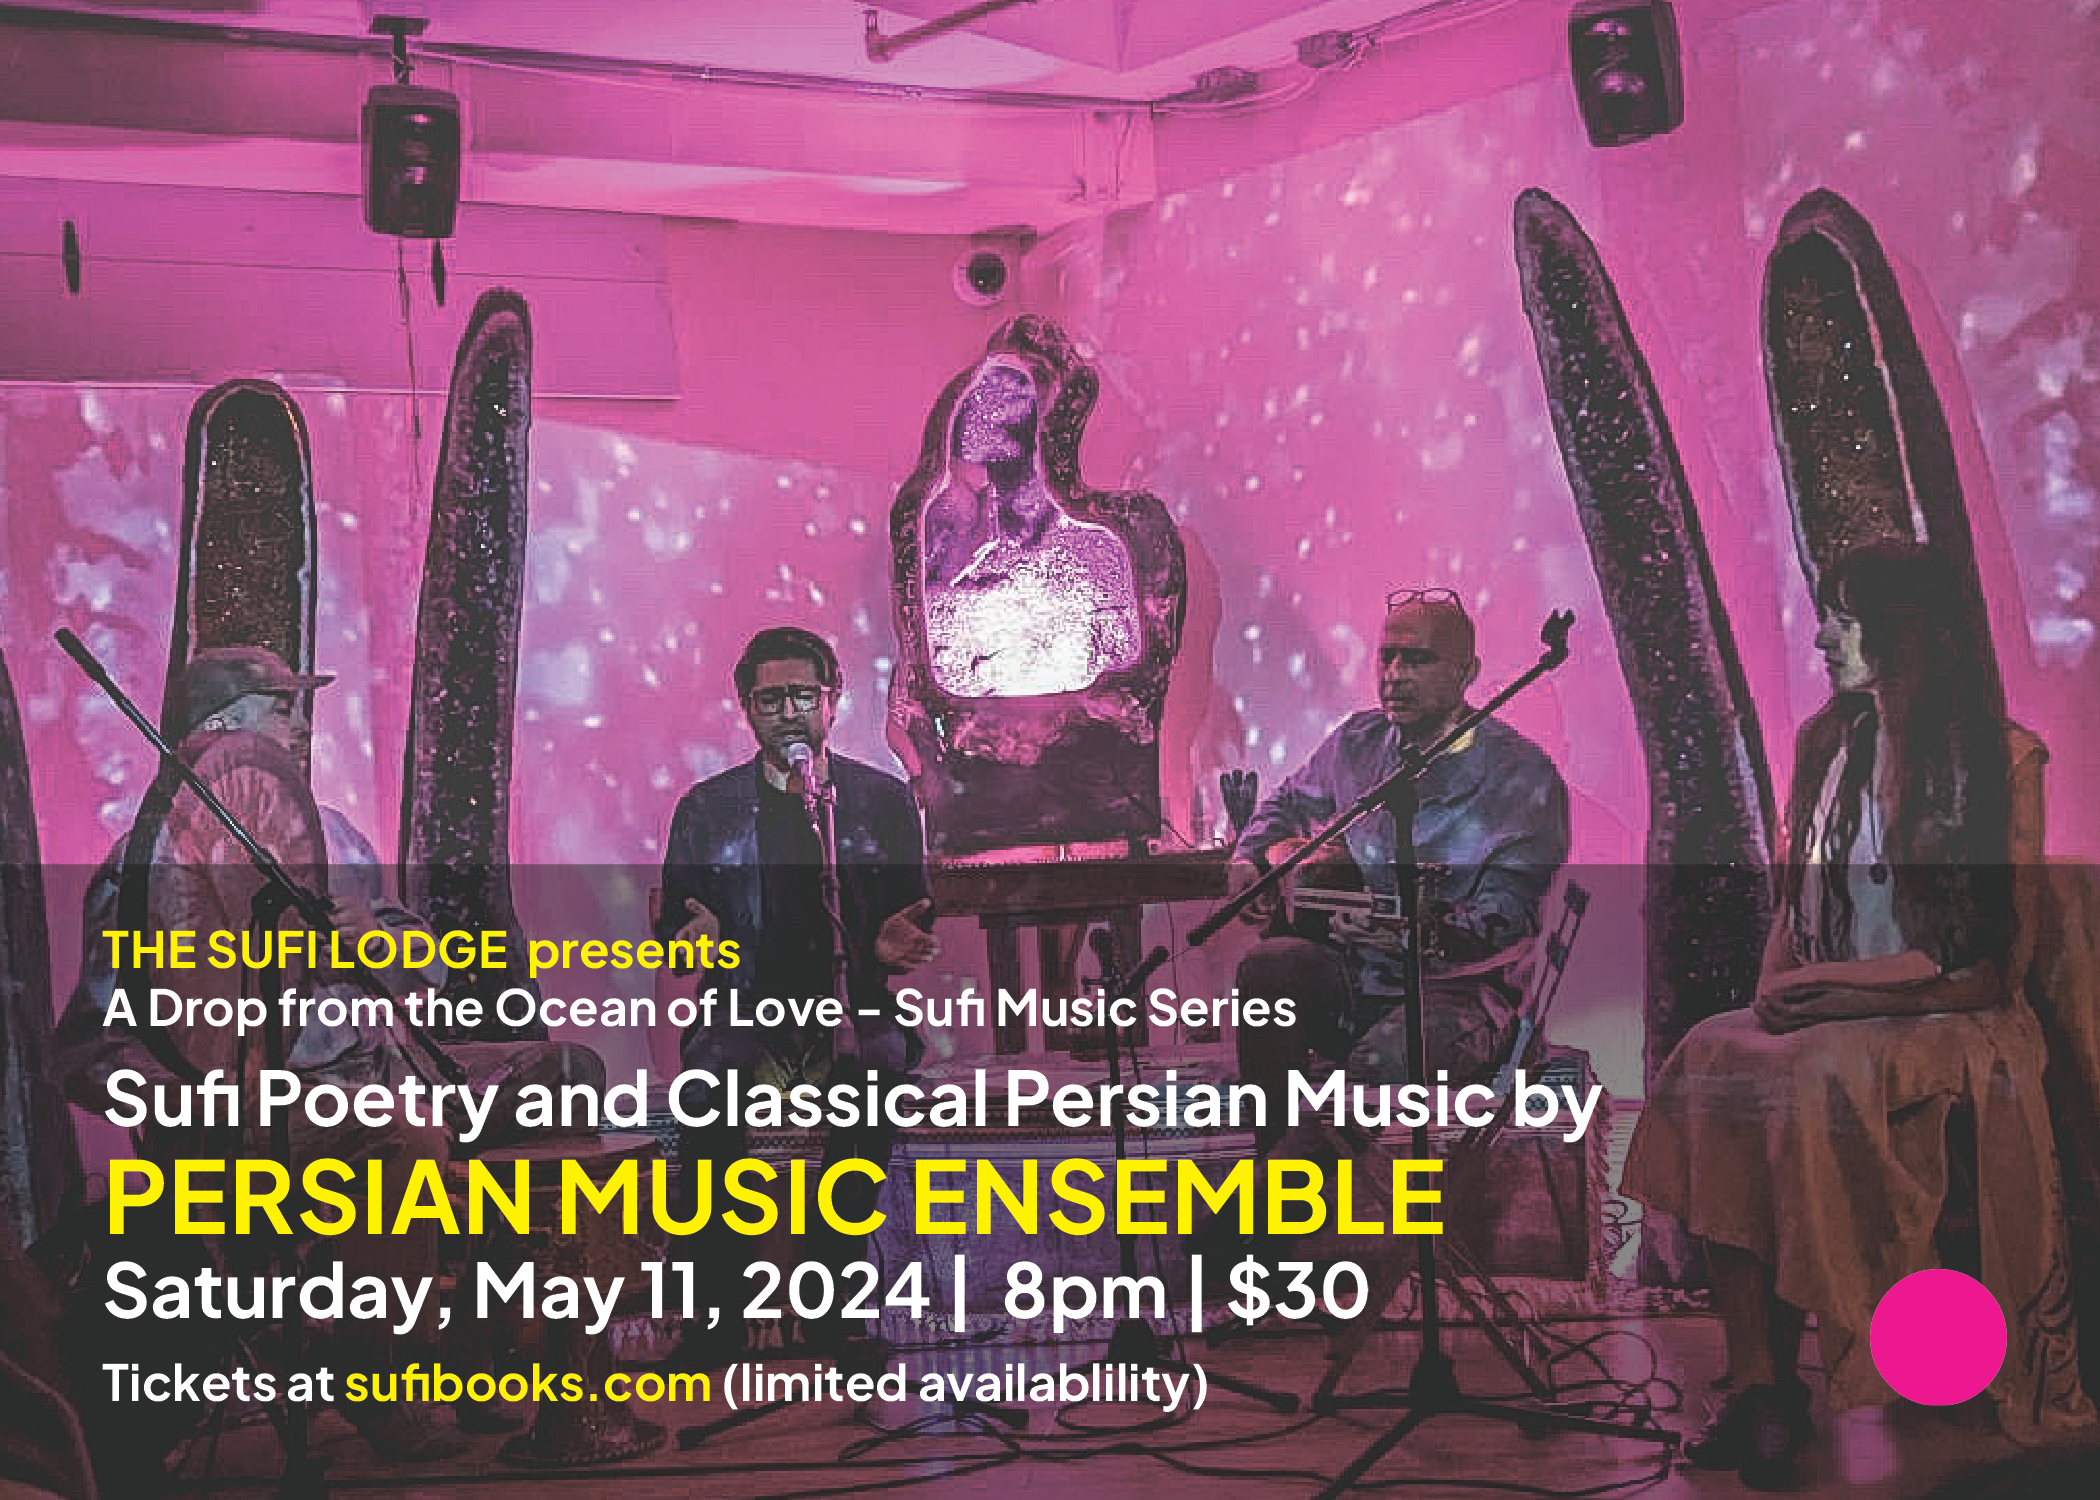 Saturday, May 11, 2024 | Sufi Poetry and Classical Persian Music by Persian Music Ensemble